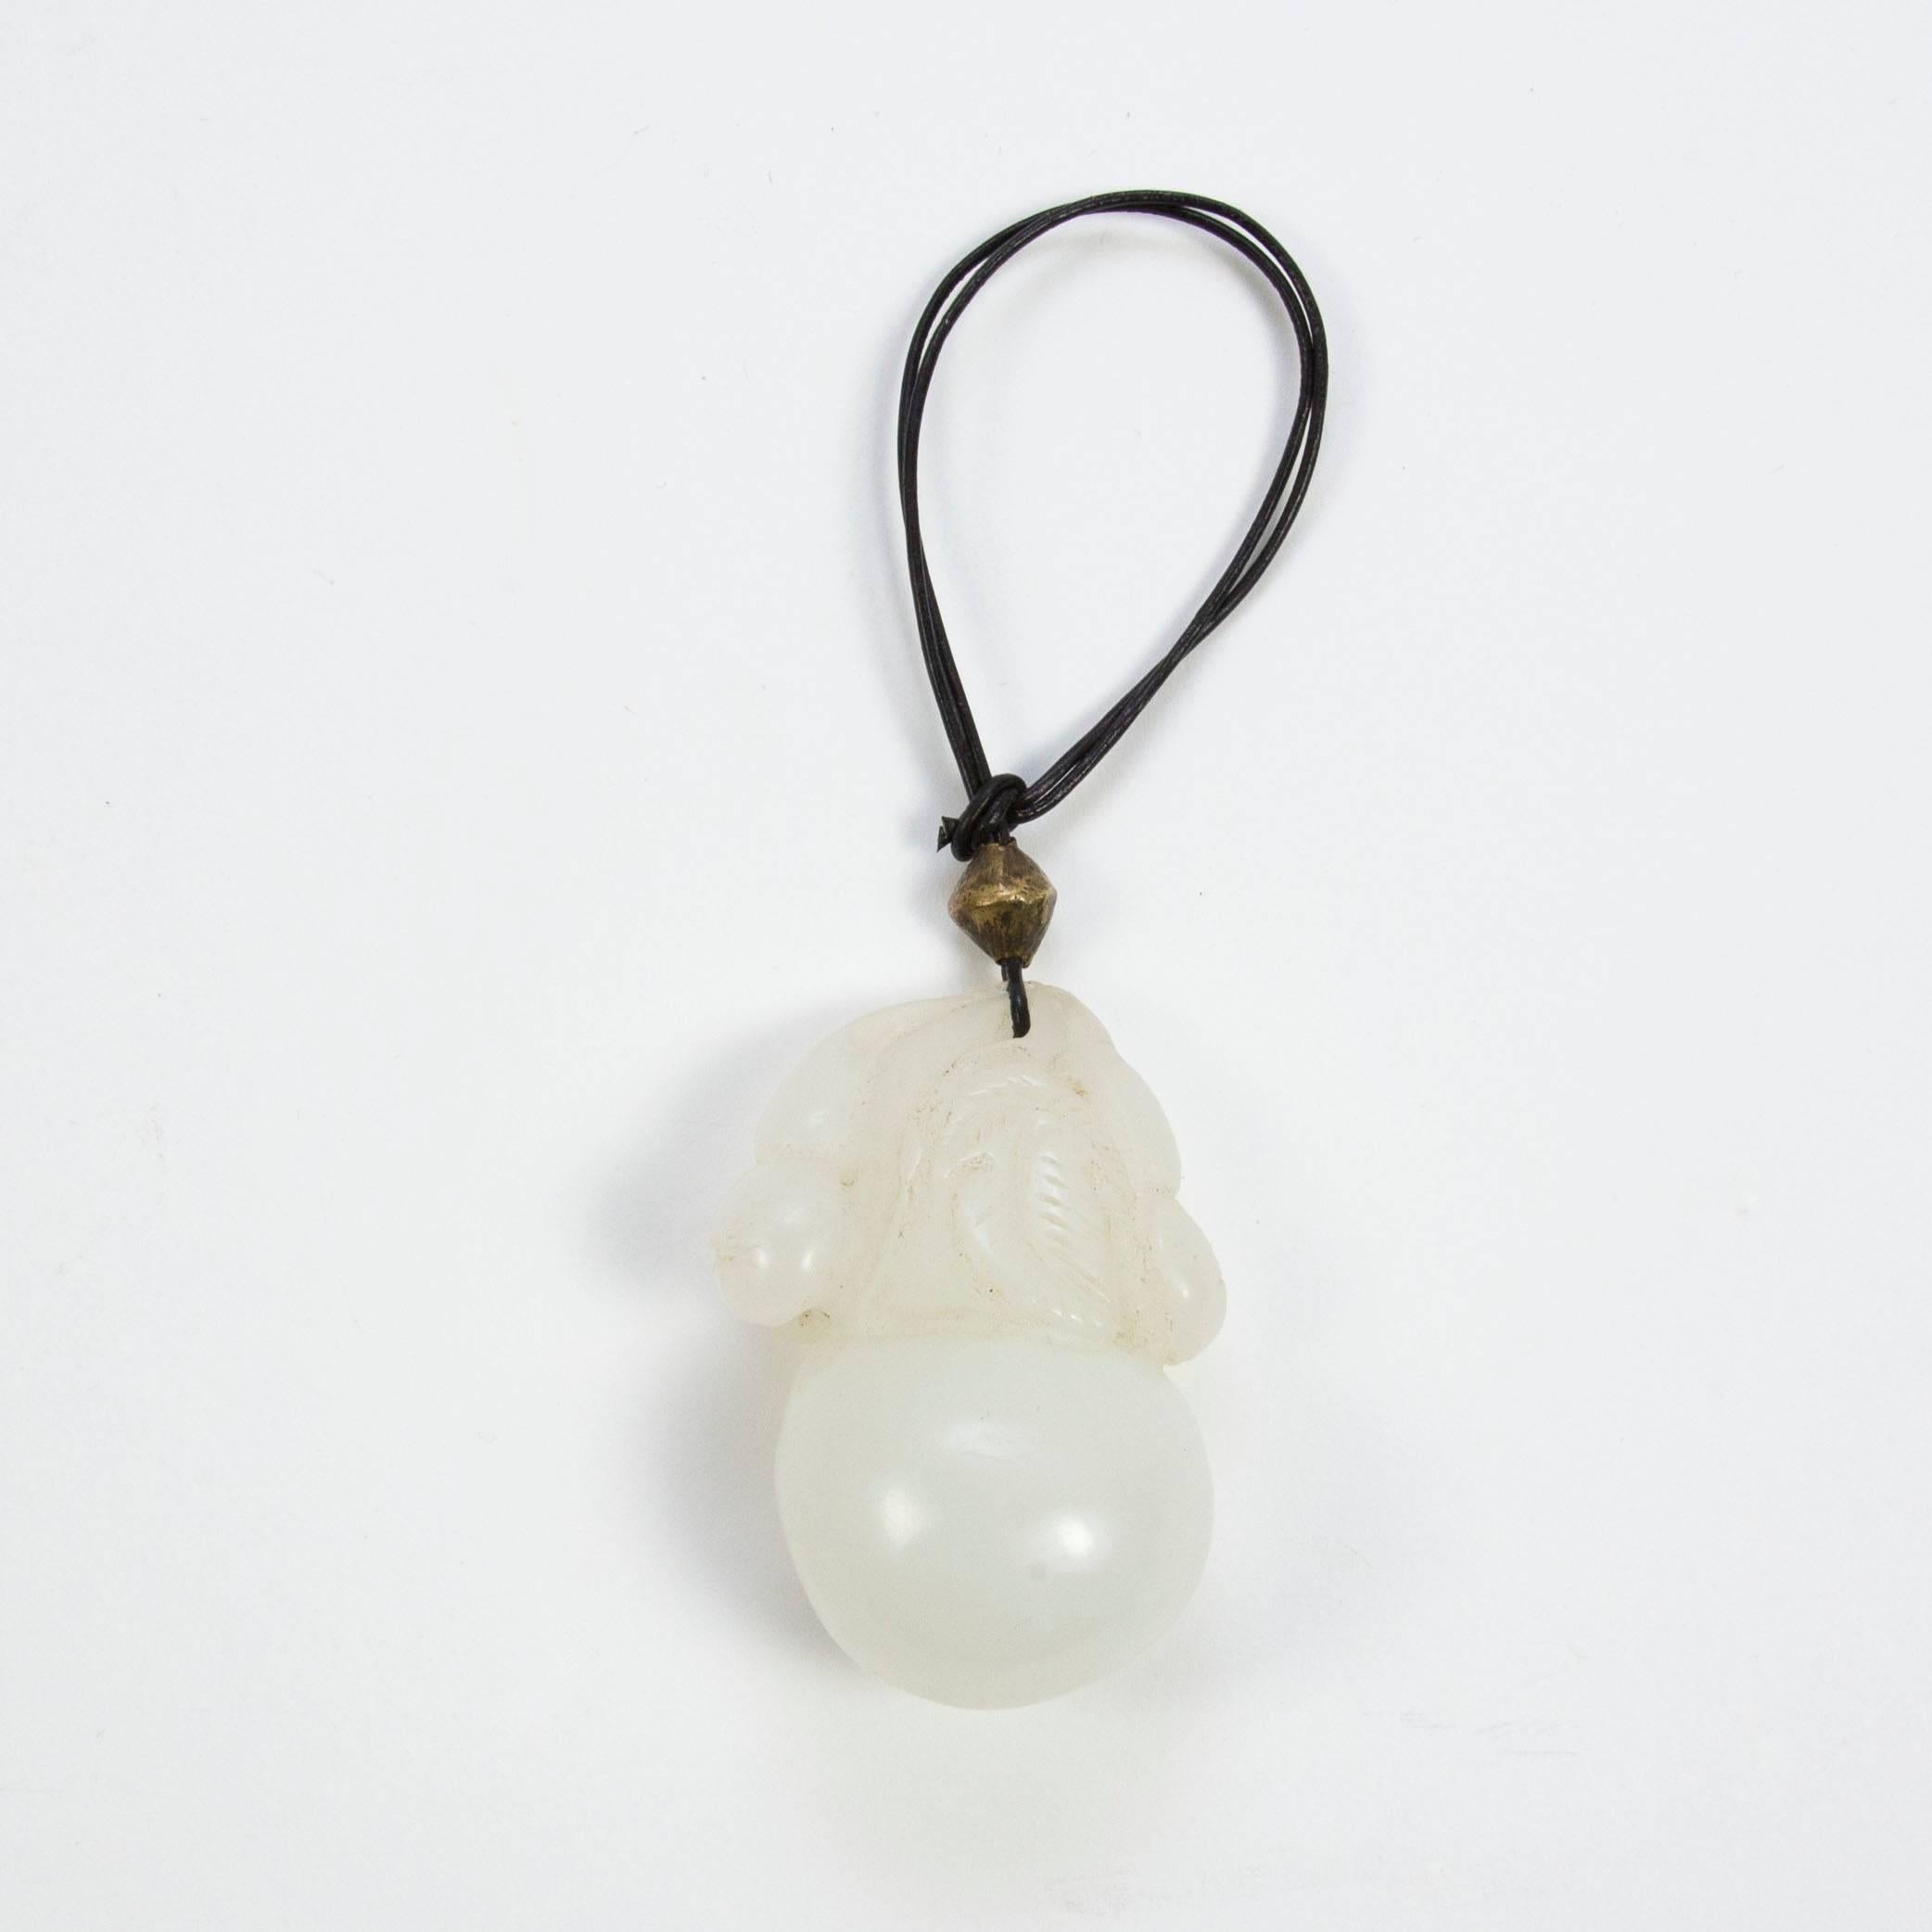 Fabulous antique Carved Natural White Jade Jadeite Calabash Pendant Necklace; measuring approx. 2.50 inches x 1.50 inches; approx. total weight 78.33 grams; Natural Jadeite is known as 'heavenly' and ‘Imperial' in the Chinese culture, believing it